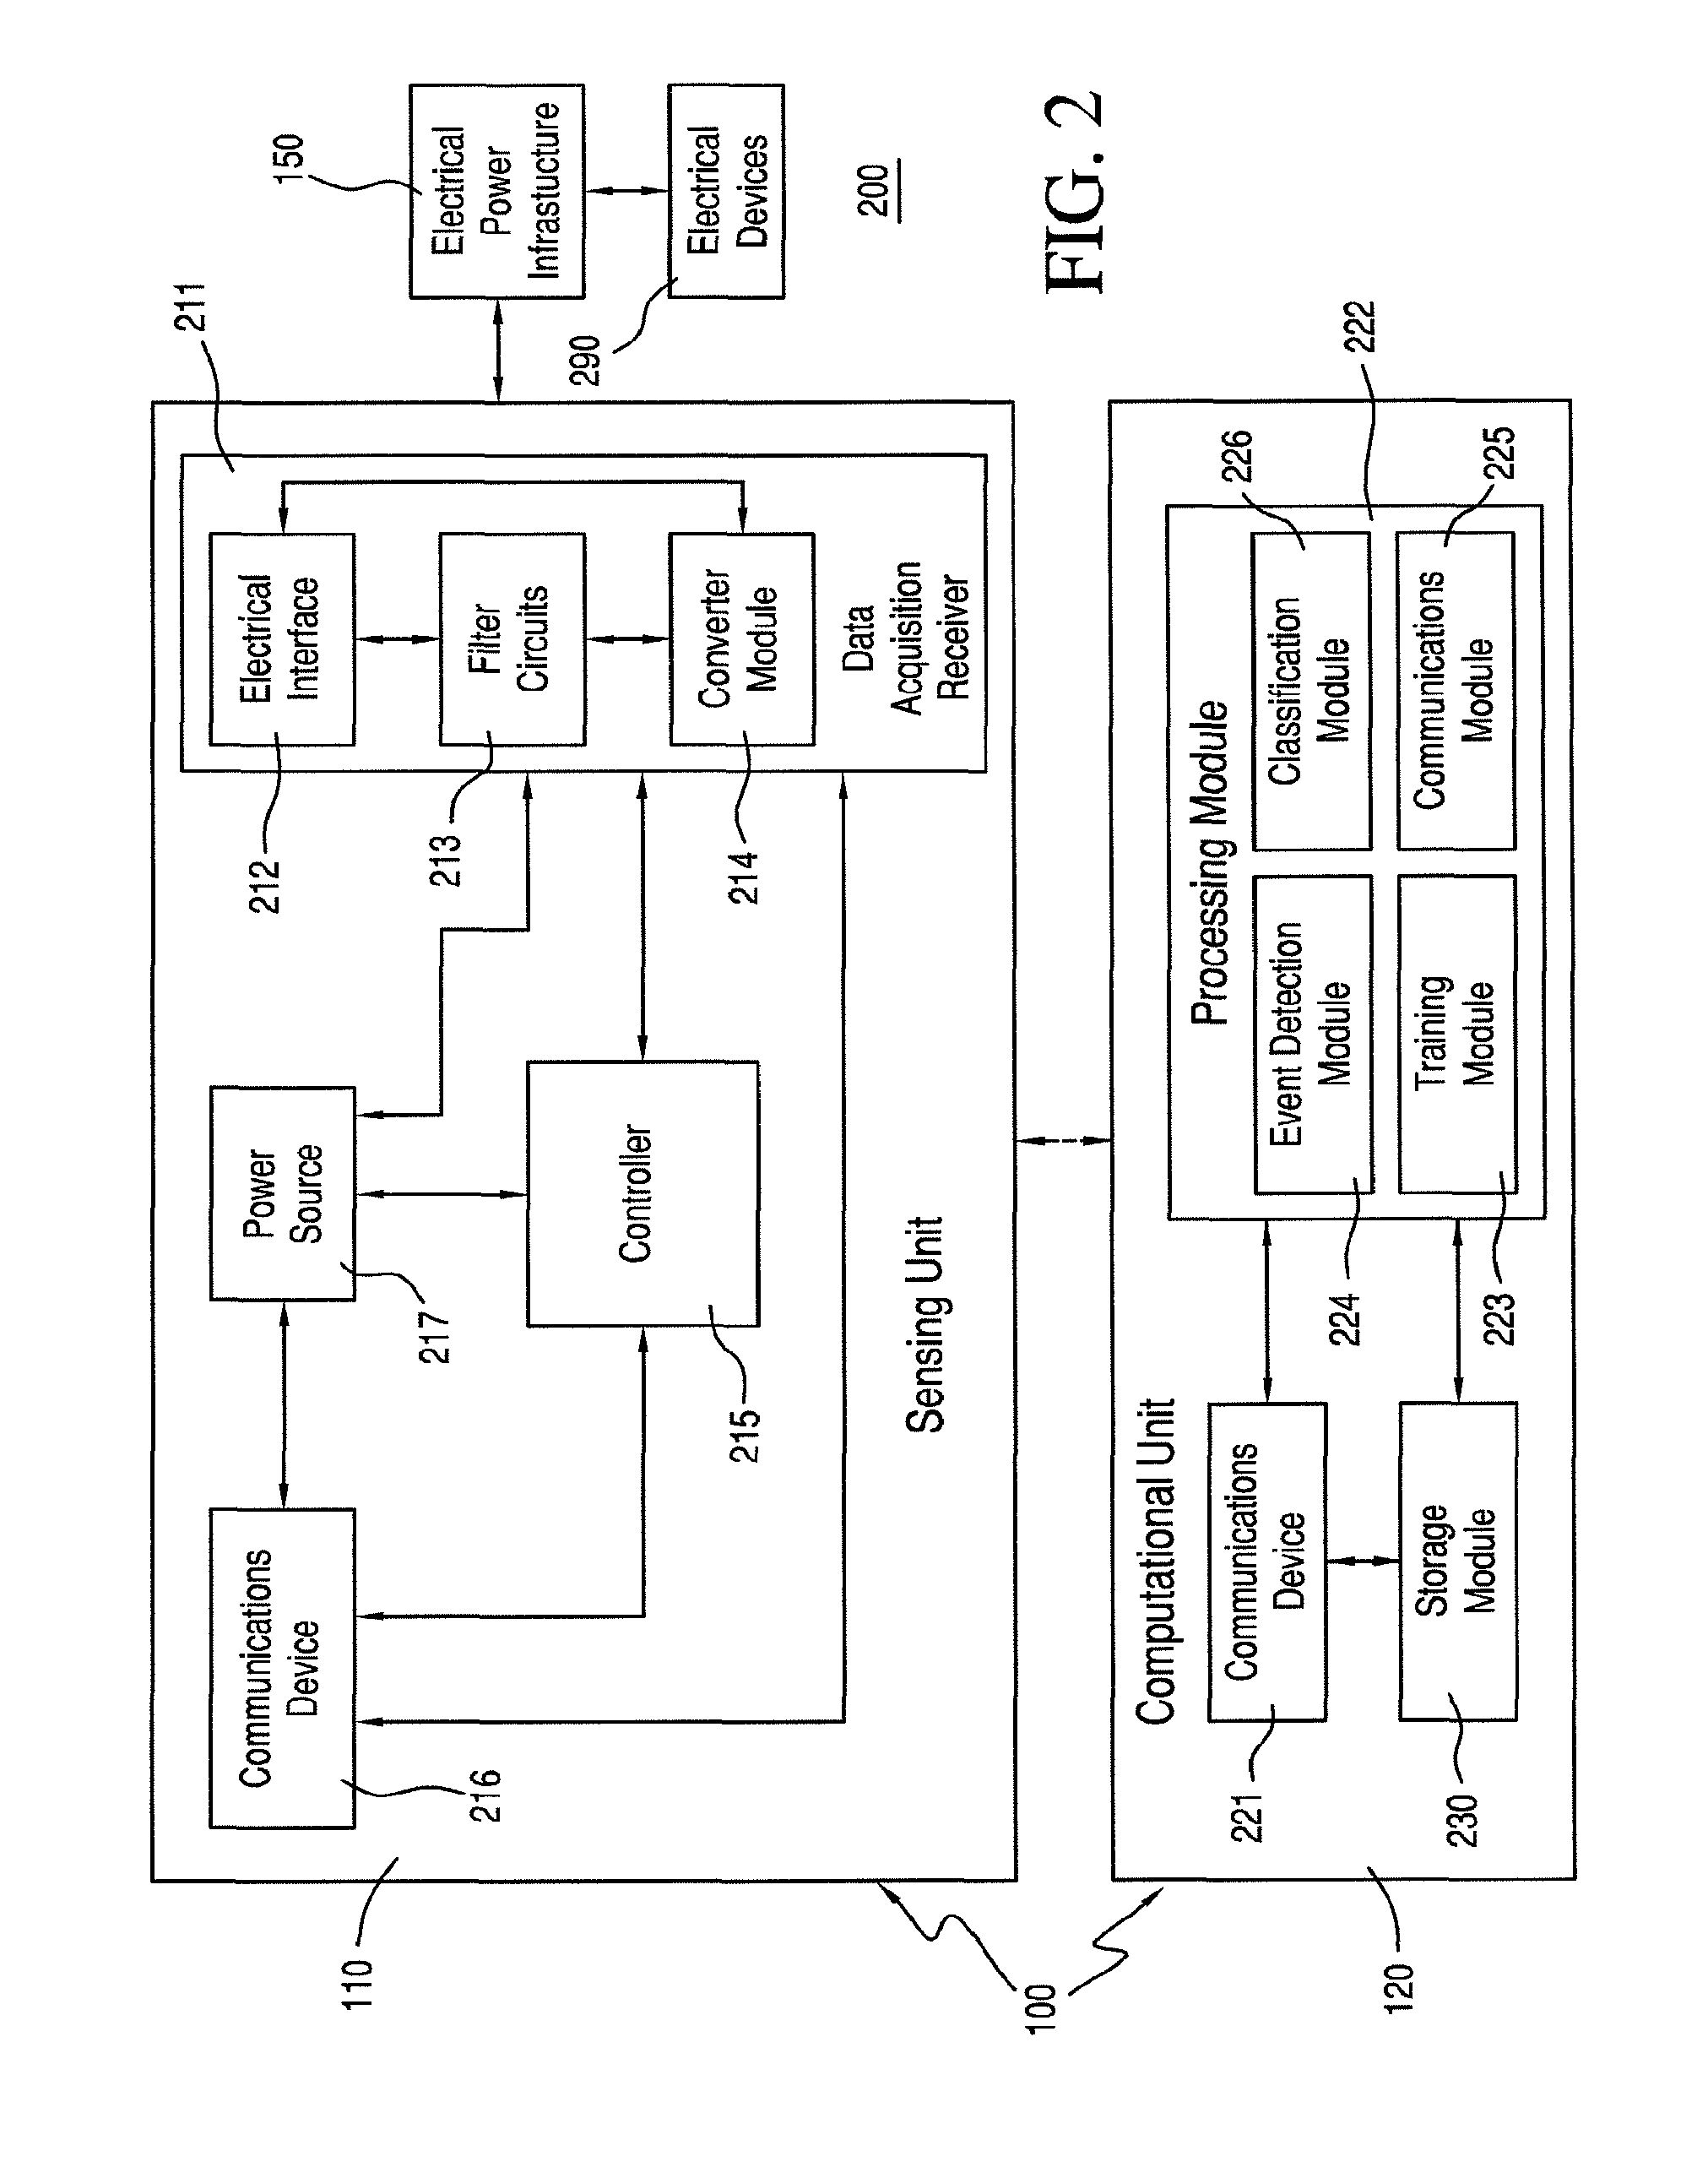 Electrical event detection device and method of detecting and classifying electrical power usage